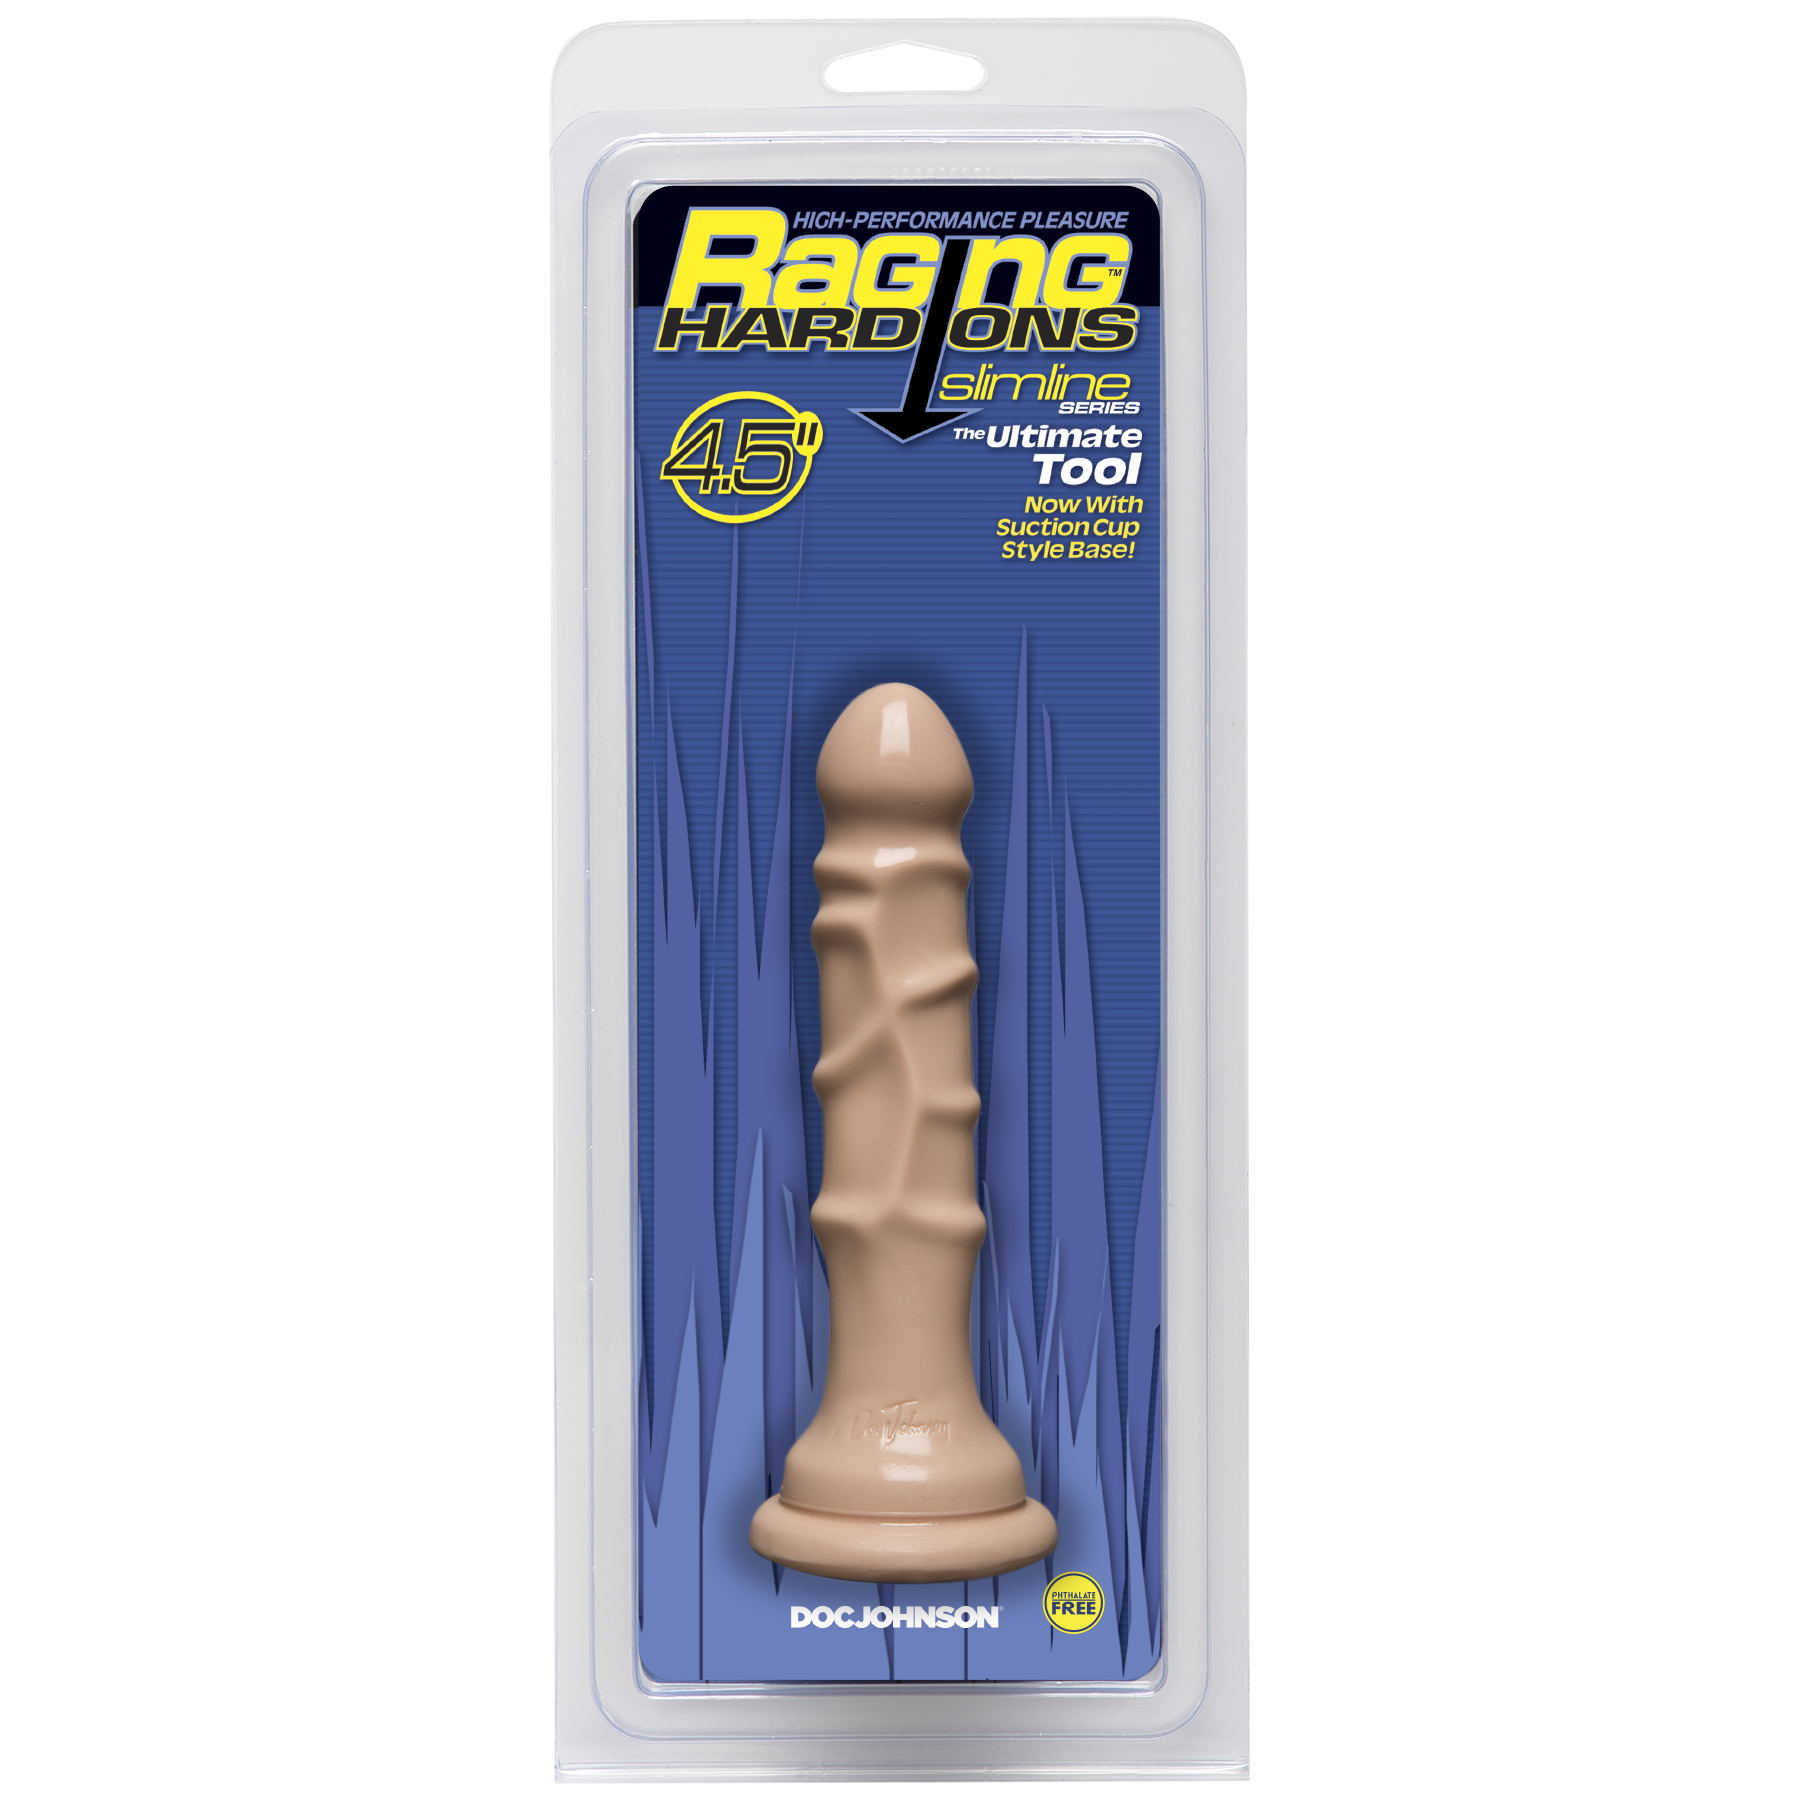 Doc Johnson Raging Hard-Ons - Slimline Series - The Ultimate Tool Dildo with Suction Cup